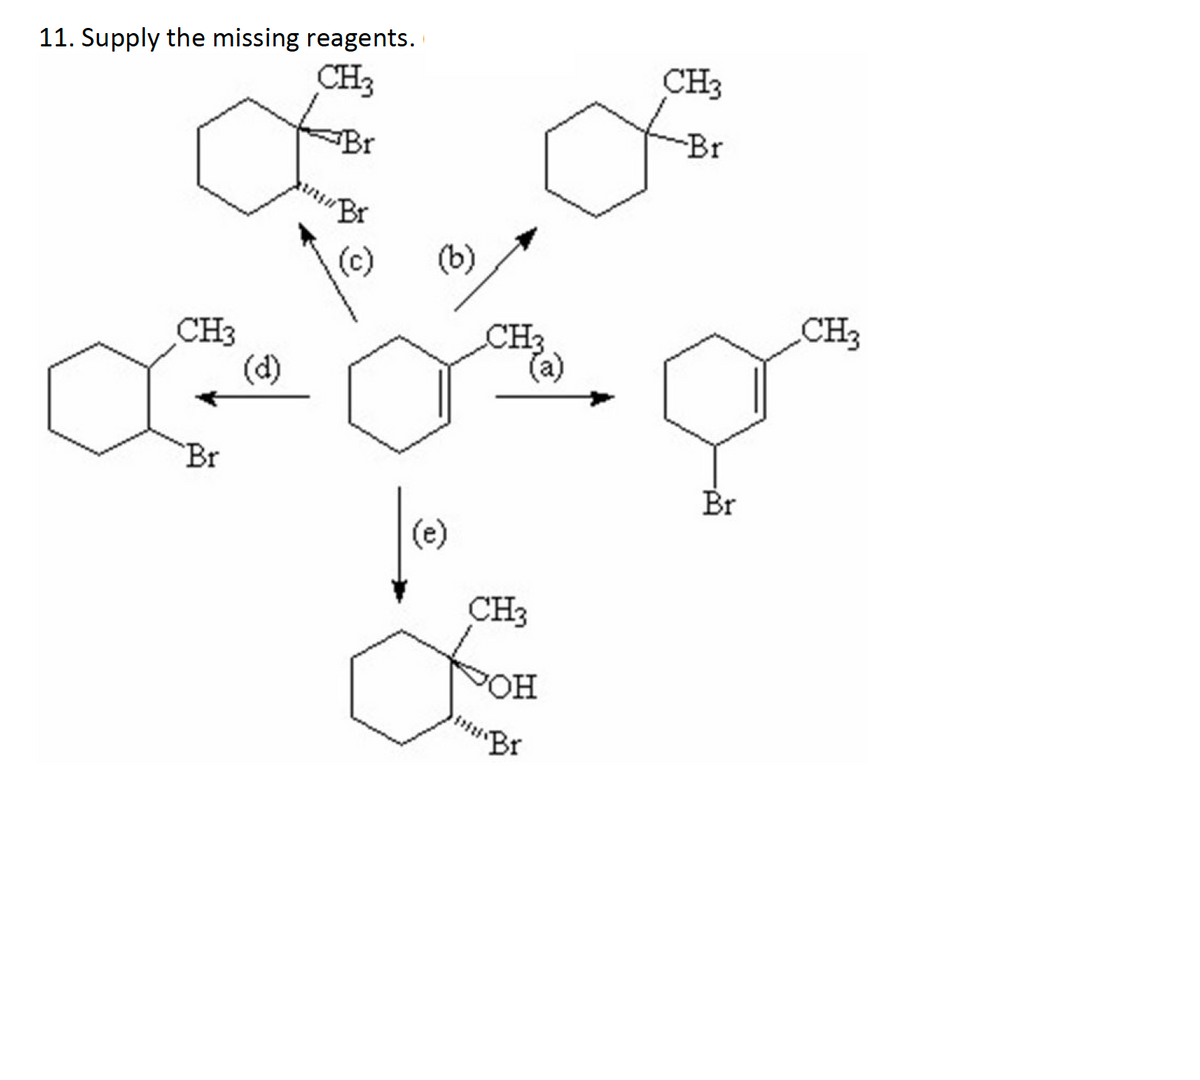 11. Supply the missing reagents.
CH3
CH3
Br
-Br
Br
(c)
(b)
CH3
CH3
(d)
CH3
(a)
`Br
Br
(e)
CH3
POH
Br
